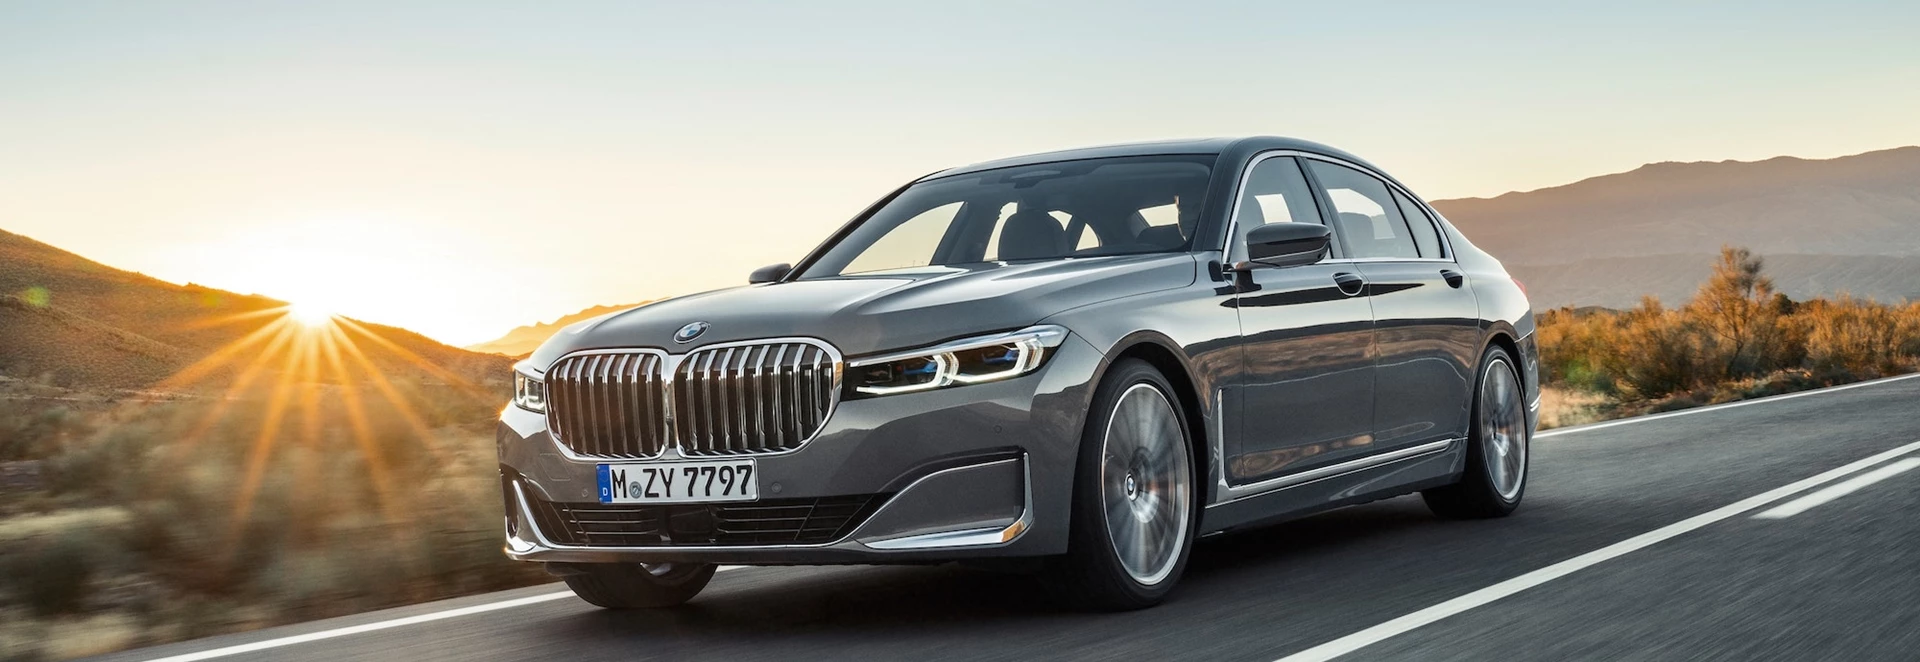 2019 BMW 7 Series Review 